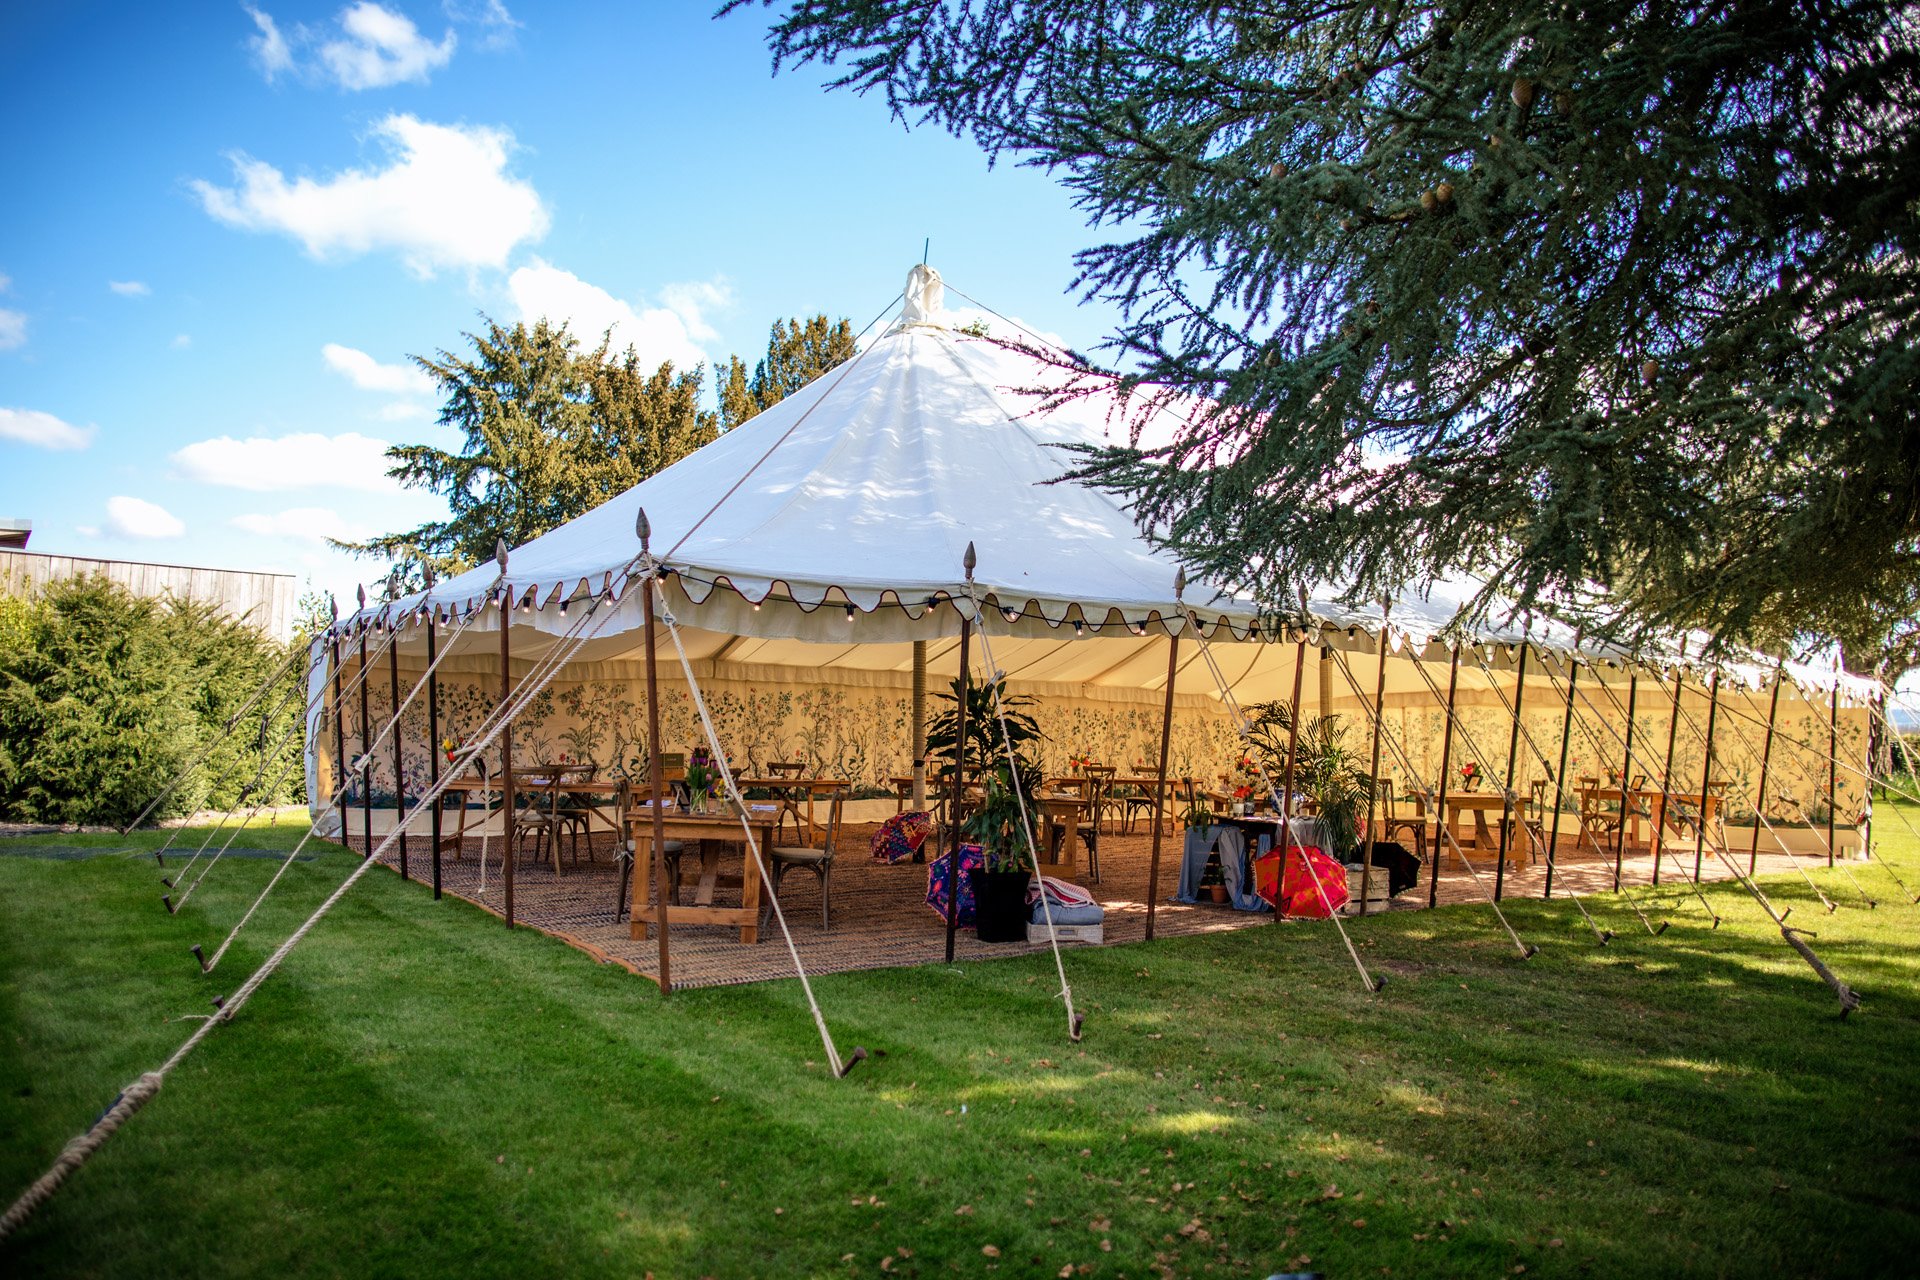 Alfresco dining under canvas for wedding tastings of the best wedding food in the UK